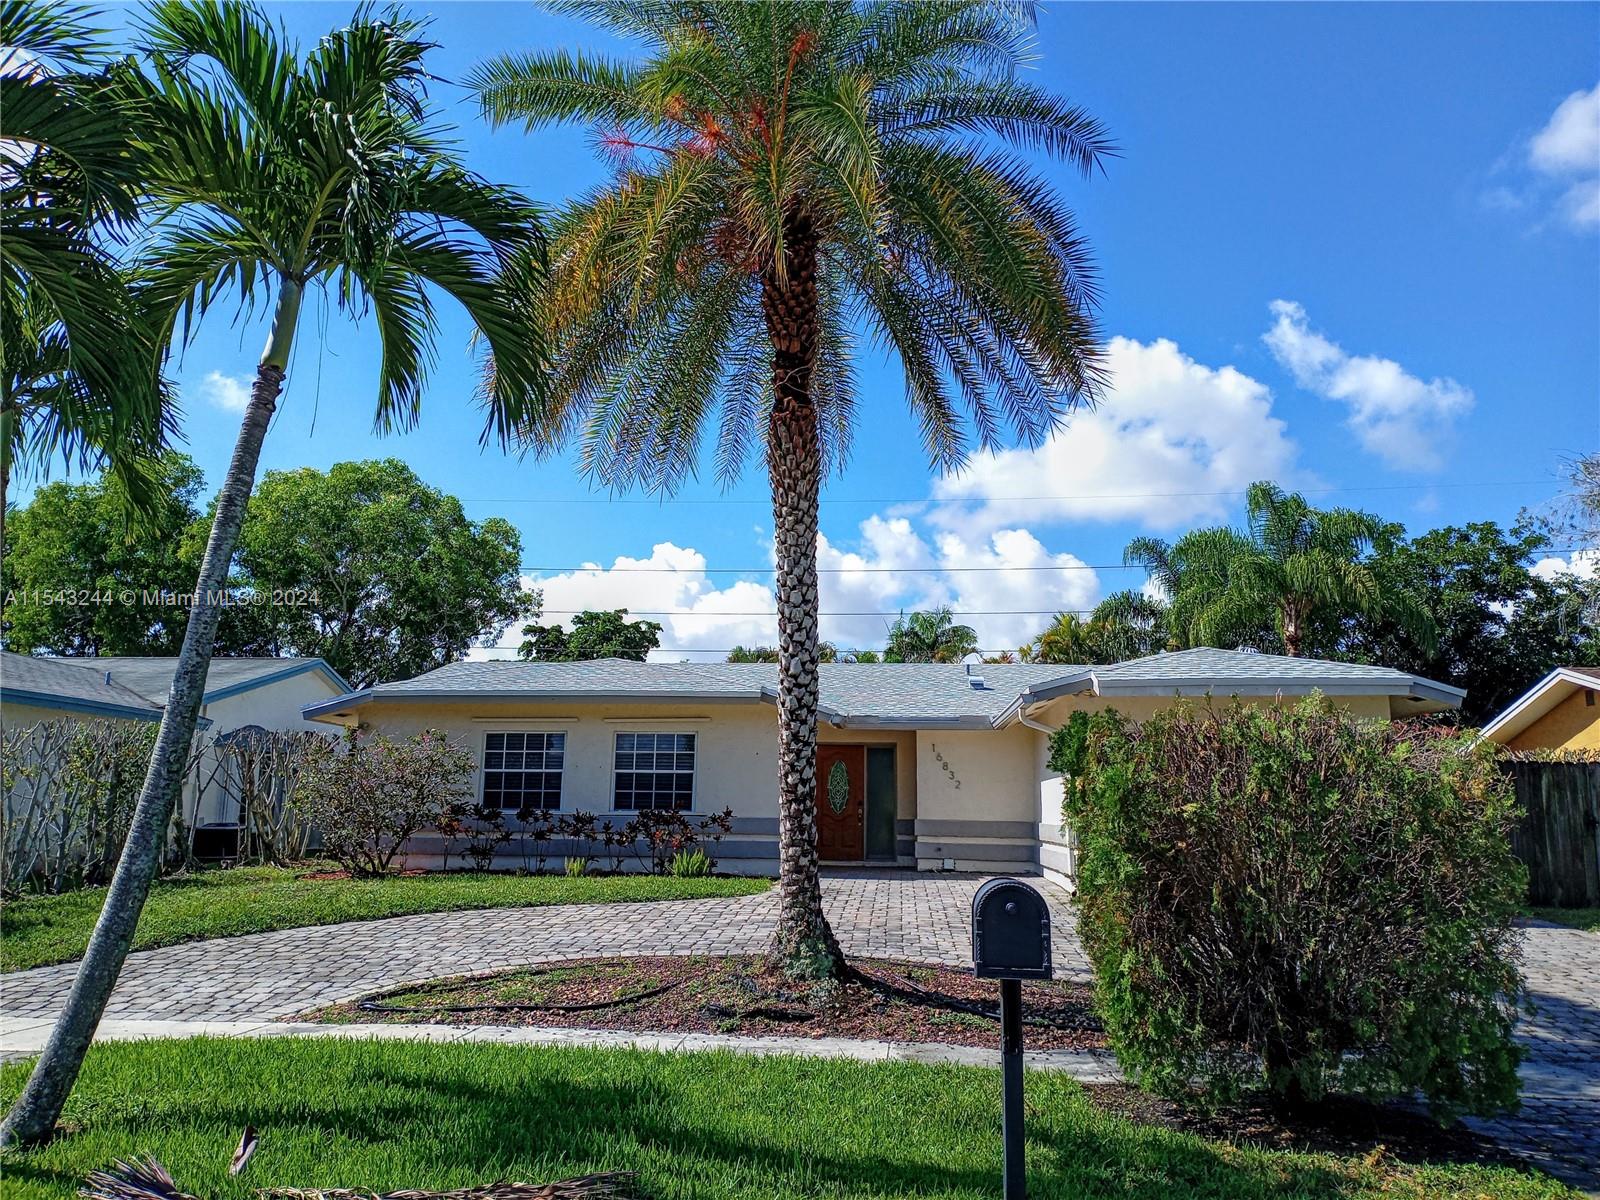 16832 SW 5th Way n/a, Weston, Florida 33326, 4 Bedrooms Bedrooms, ,2 BathroomsBathrooms,Residentiallease,For Rent,16832 SW 5th Way n/a,A11543244